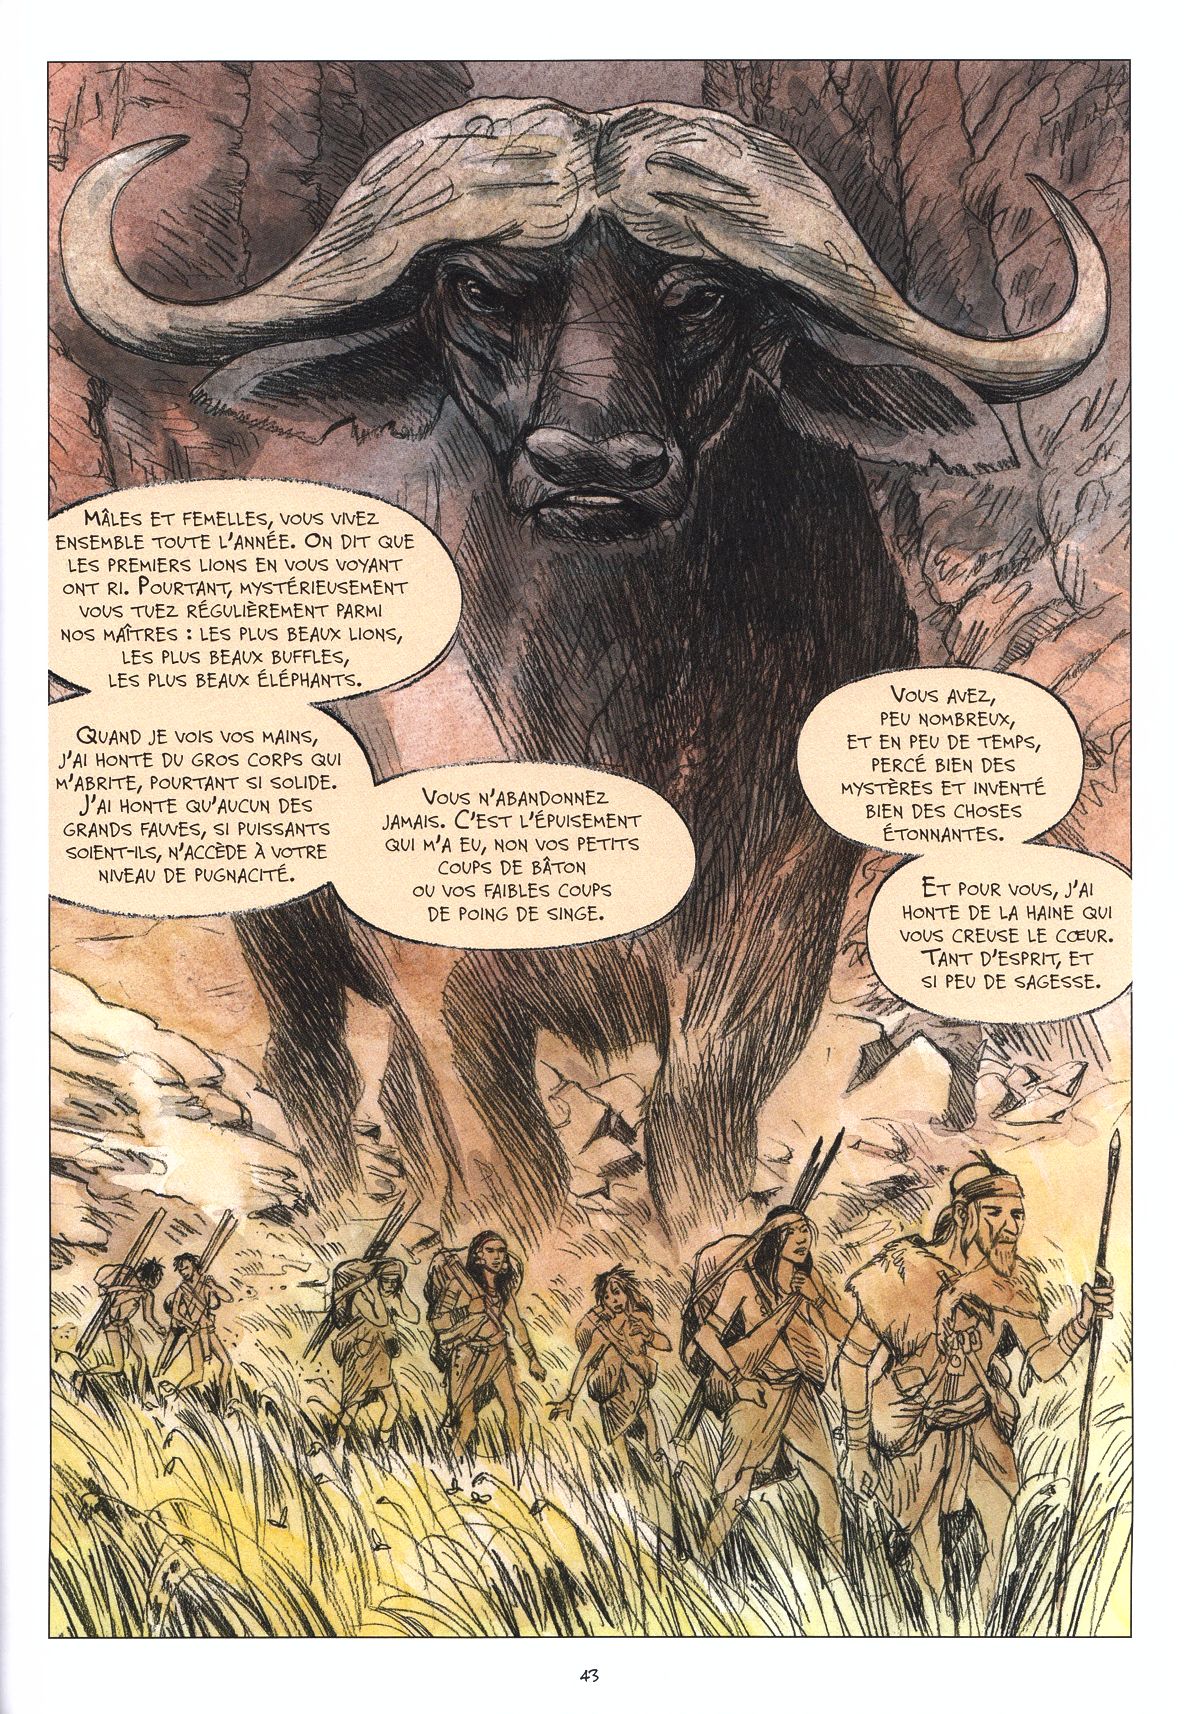 Page from the comic book « Tassili, une femme libre au Néolithique » by Maadiar and Fréwé in which the author makes the giant buffalo talk as he observes the monumental changeover, before the humans colonize every continent.